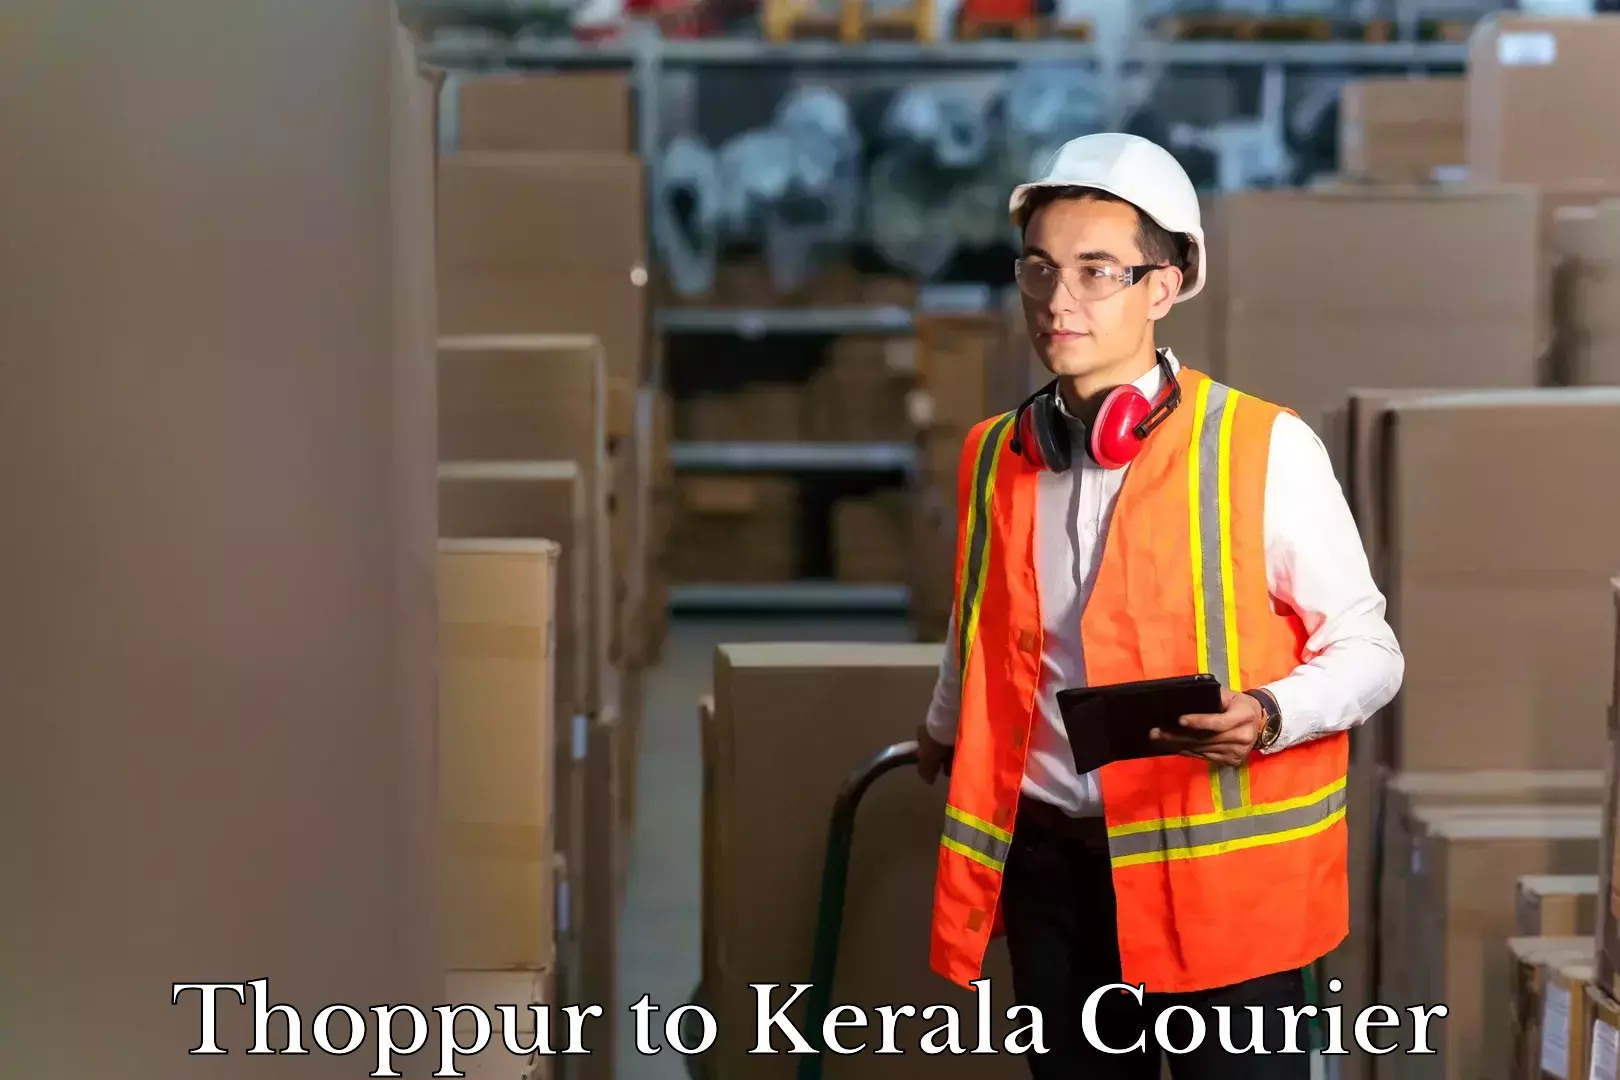 Luggage delivery news Thoppur to Kerala